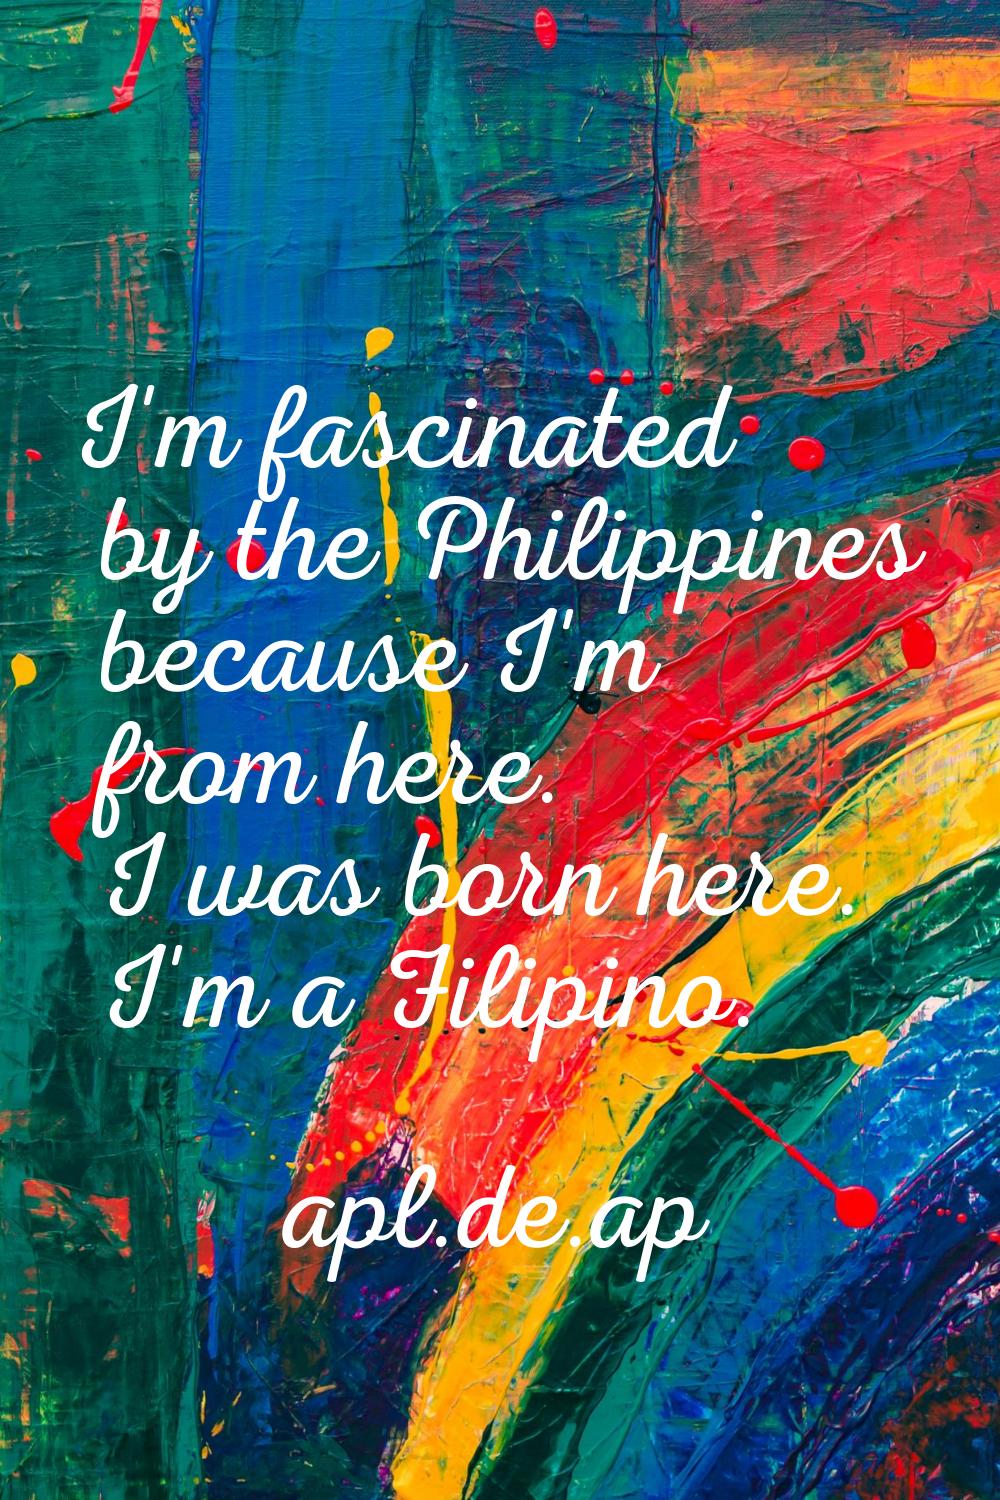 I'm fascinated by the Philippines because I'm from here. I was born here. I'm a Filipino.